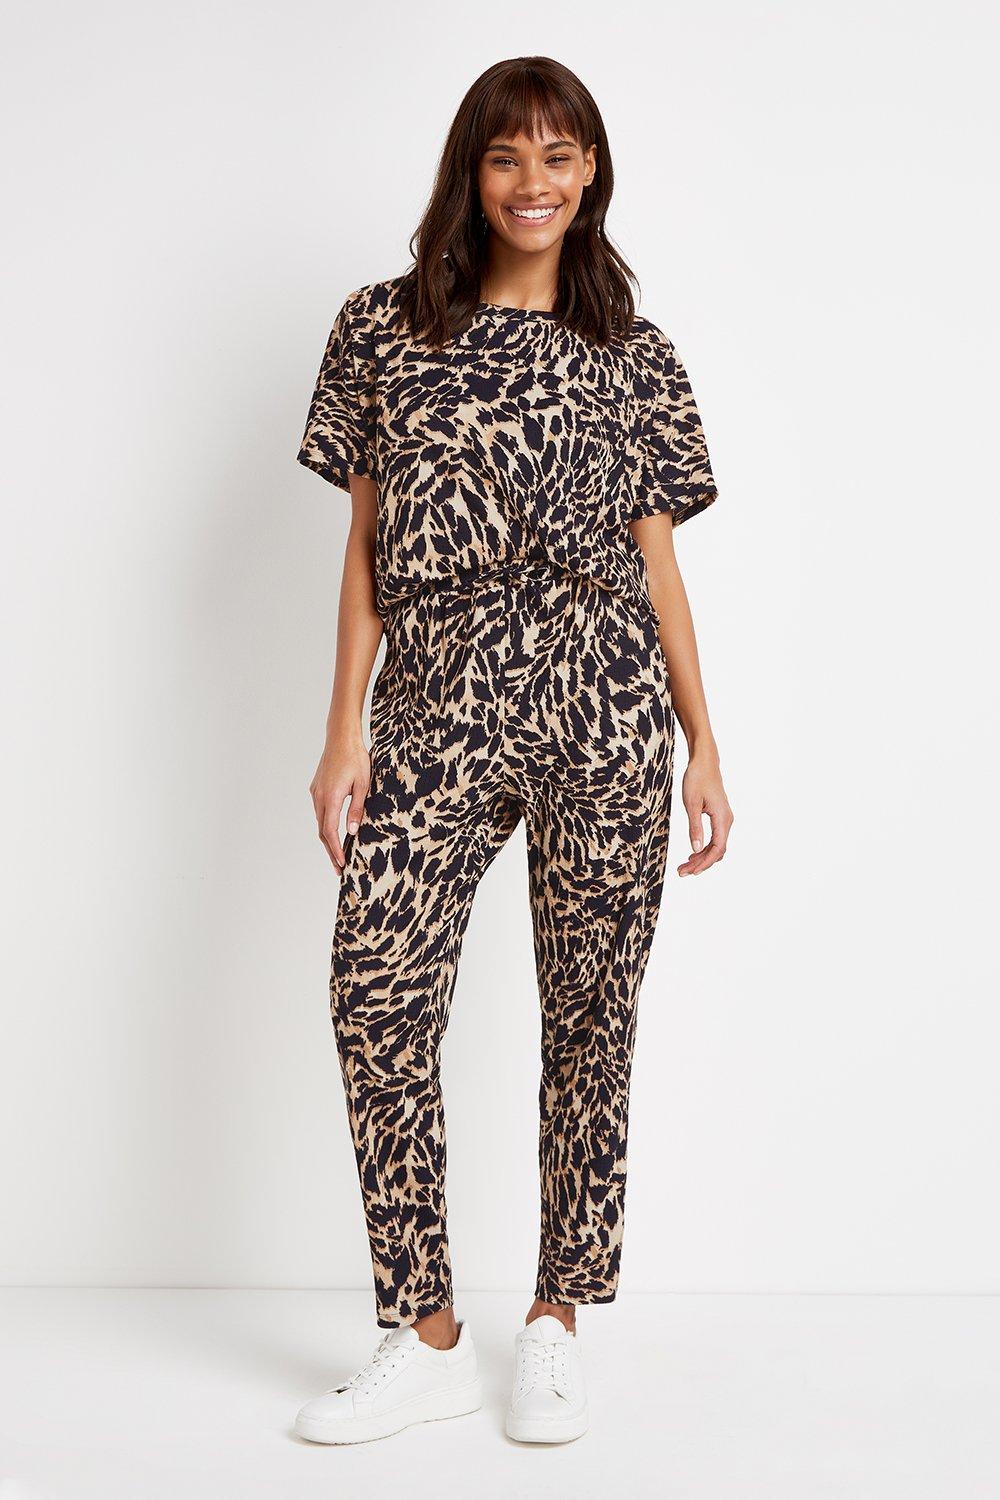 The Stylish Joggers To Take Your Off-Duty Wardrobe To The Next Level. Animal Print Brings Timeless Style, Whilst Neutral Hues Make These A Must-Have For Your New Season Wardrobe.  Joggers Relaxed Casual 99% Polyester, 1% Elastane. Machine Washable.